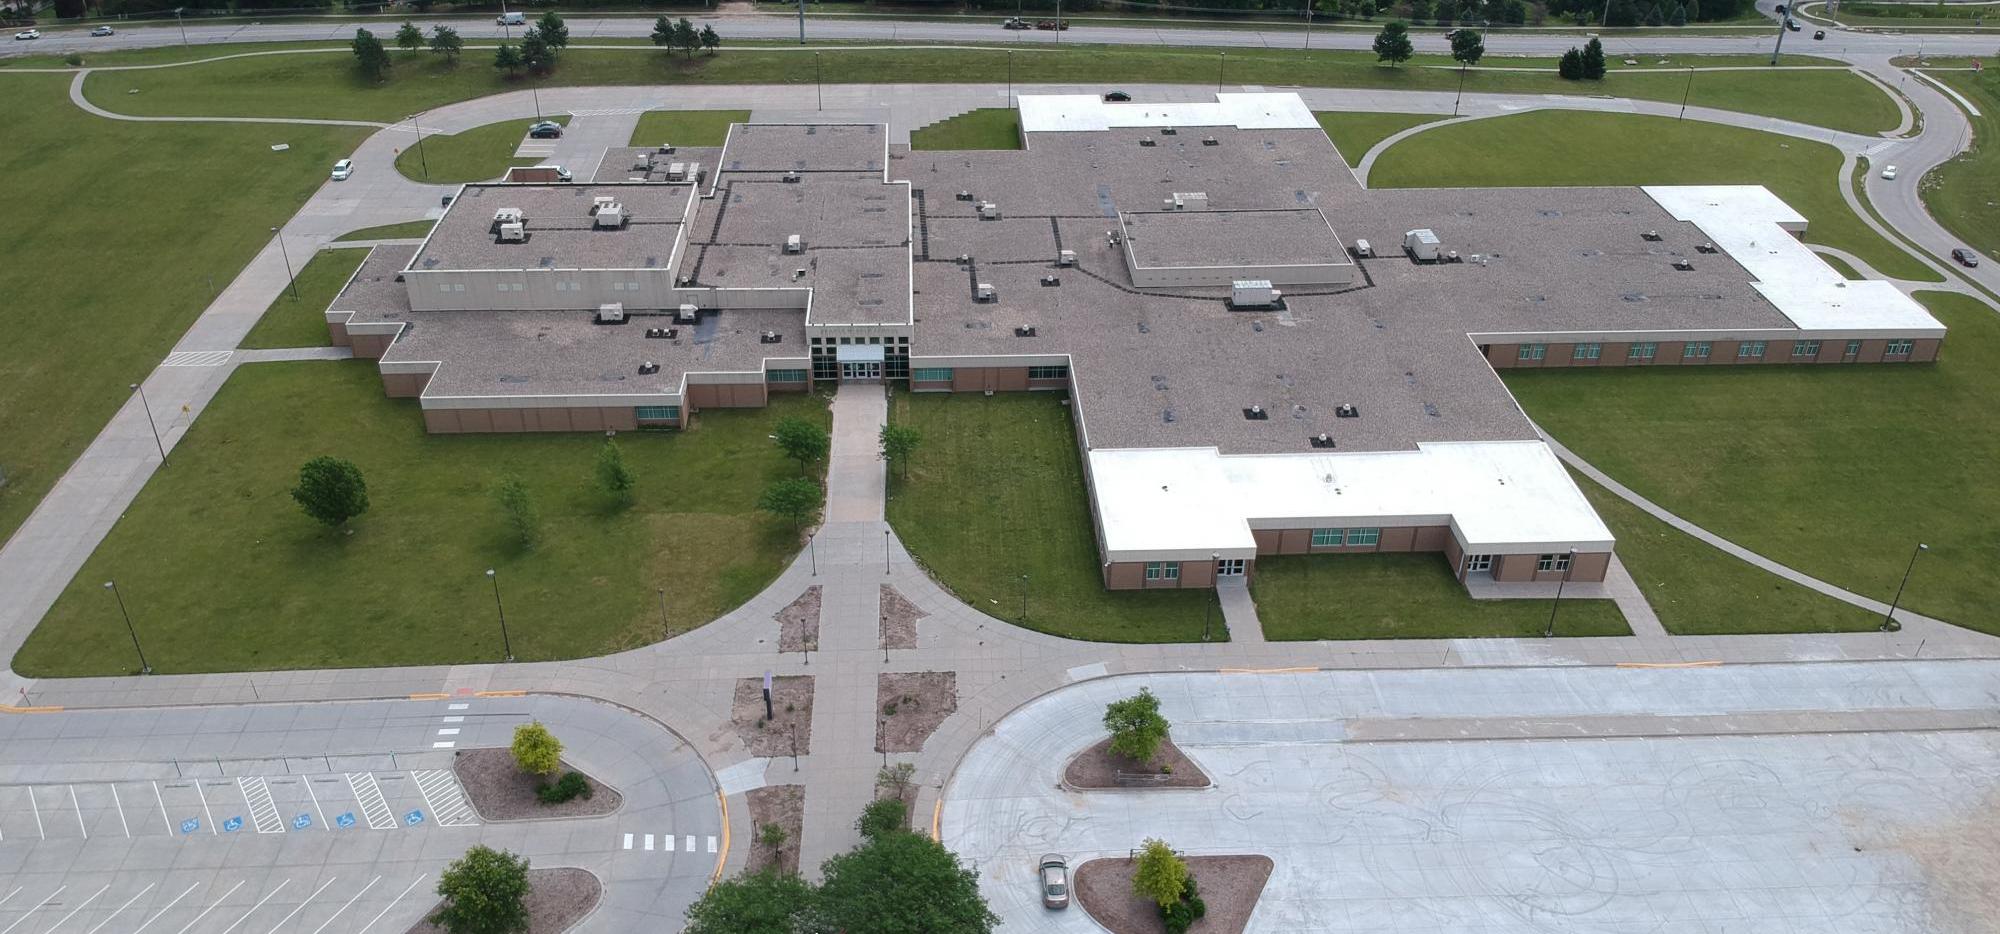 Overhead view of Beadle Middle School